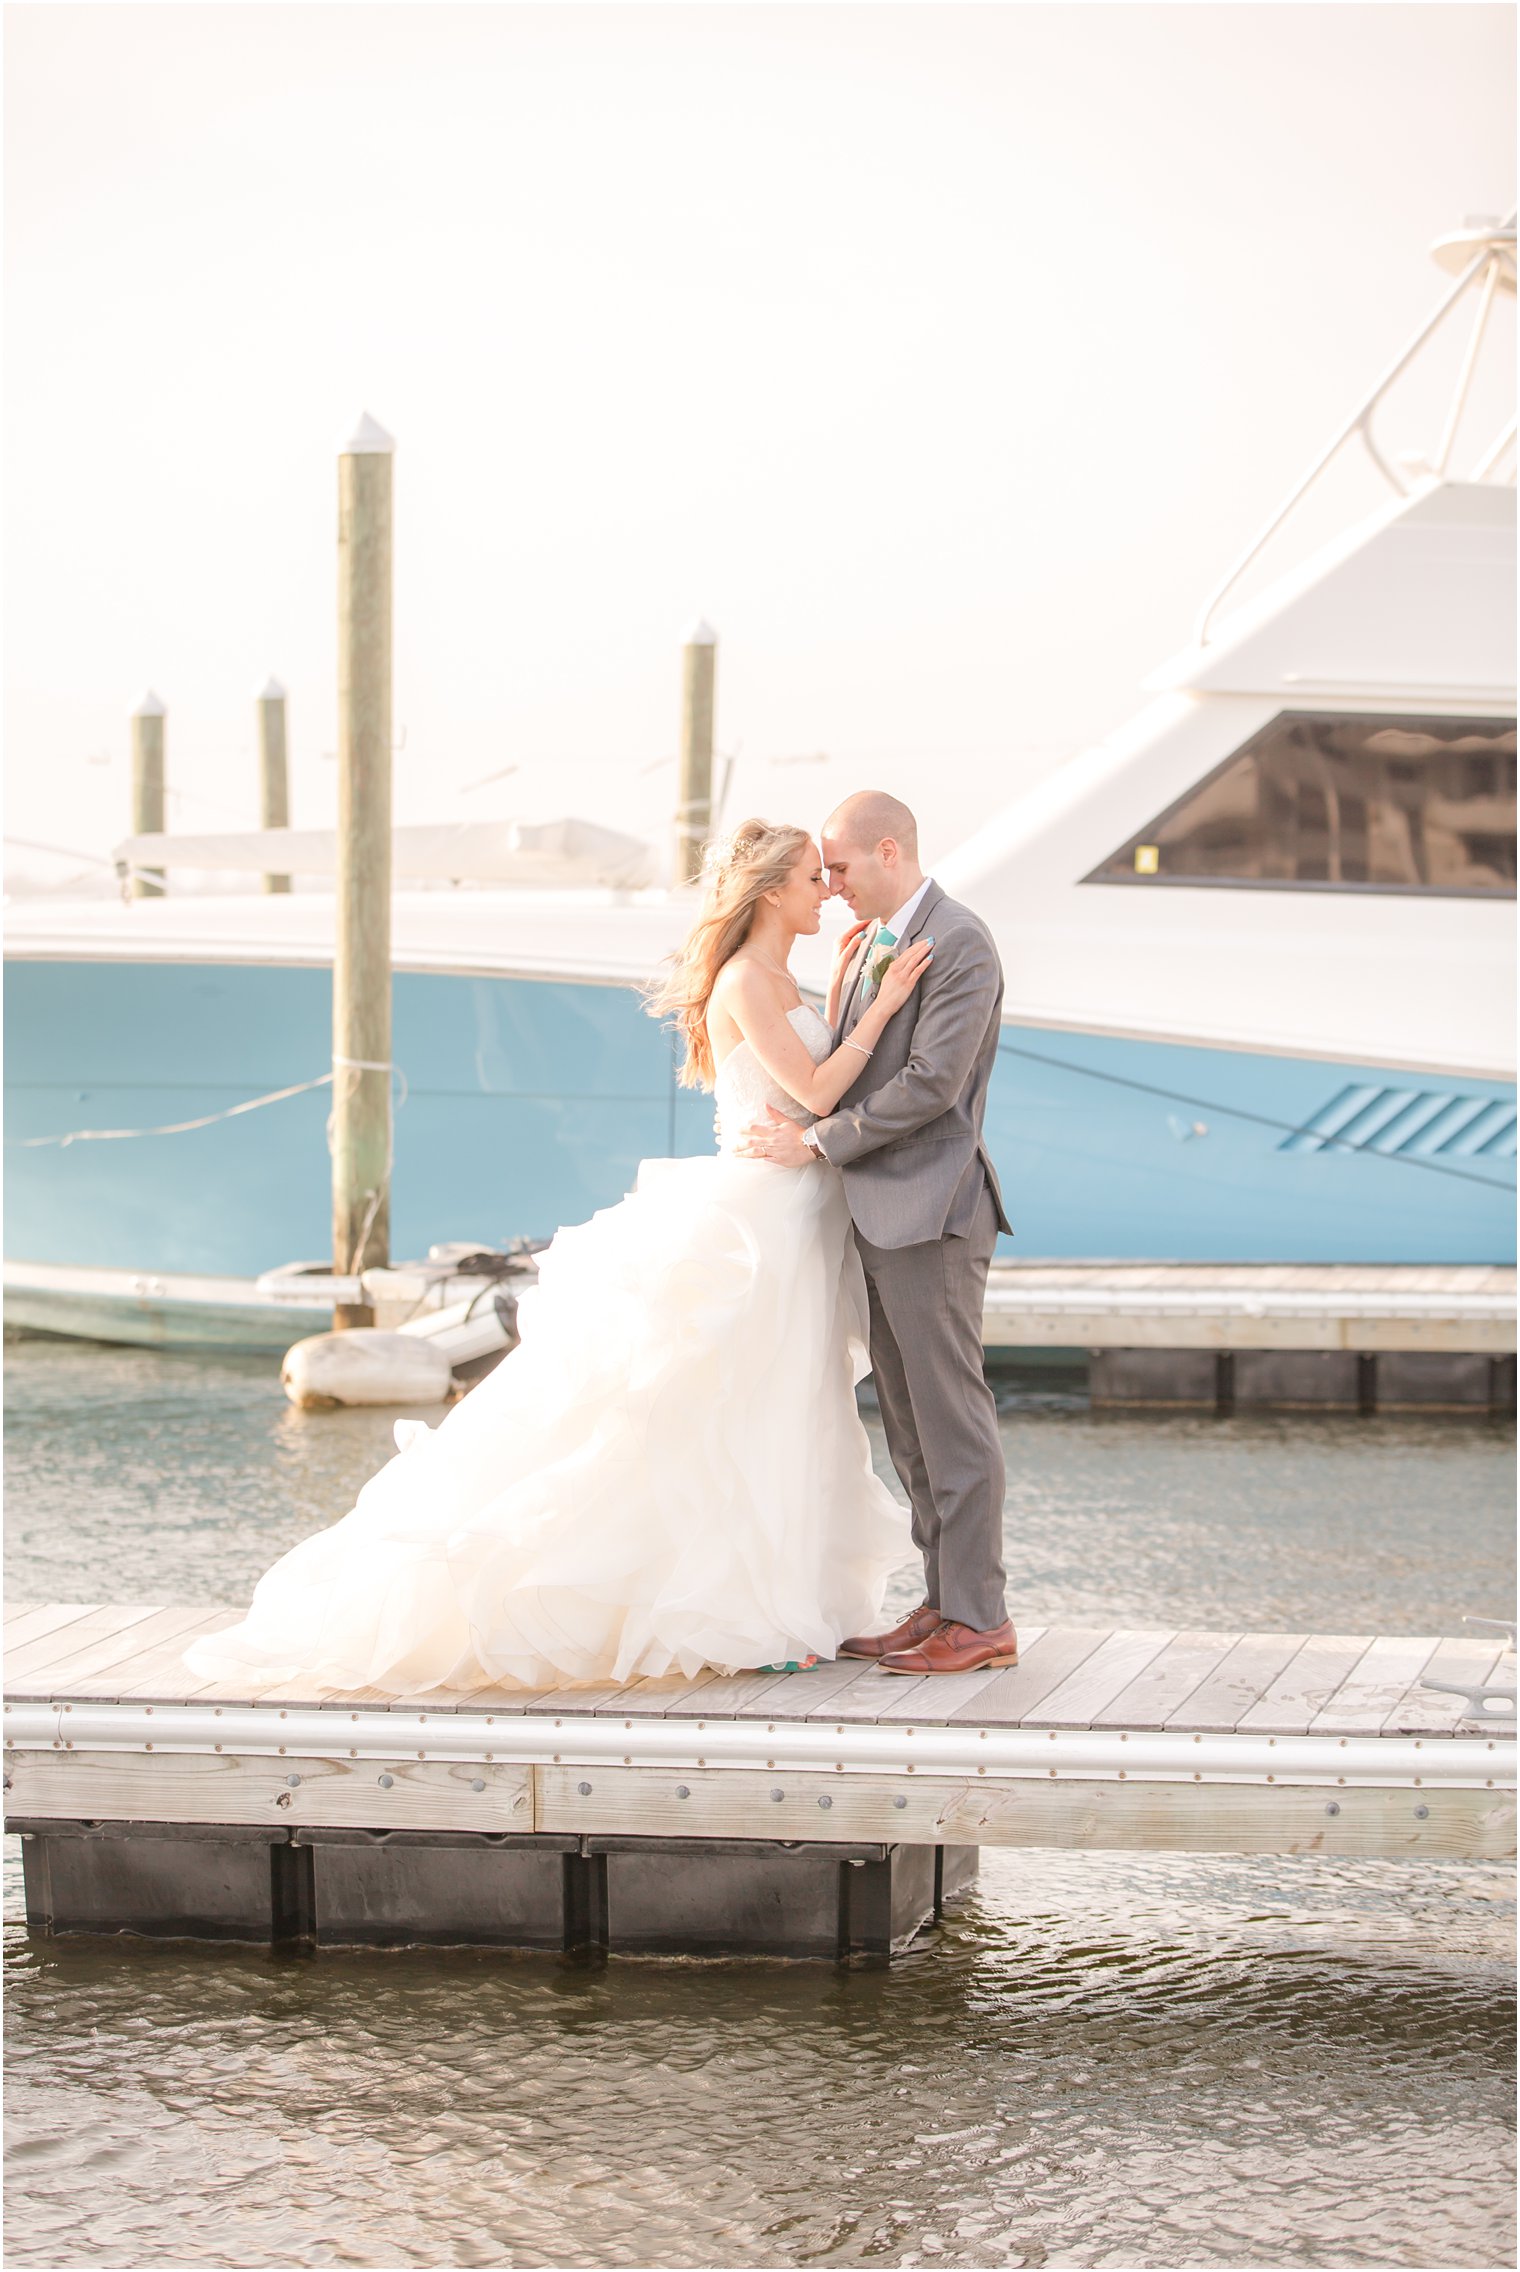 Intimate bride and groom photo at The Channel Club in Monmouth Beach, NJ